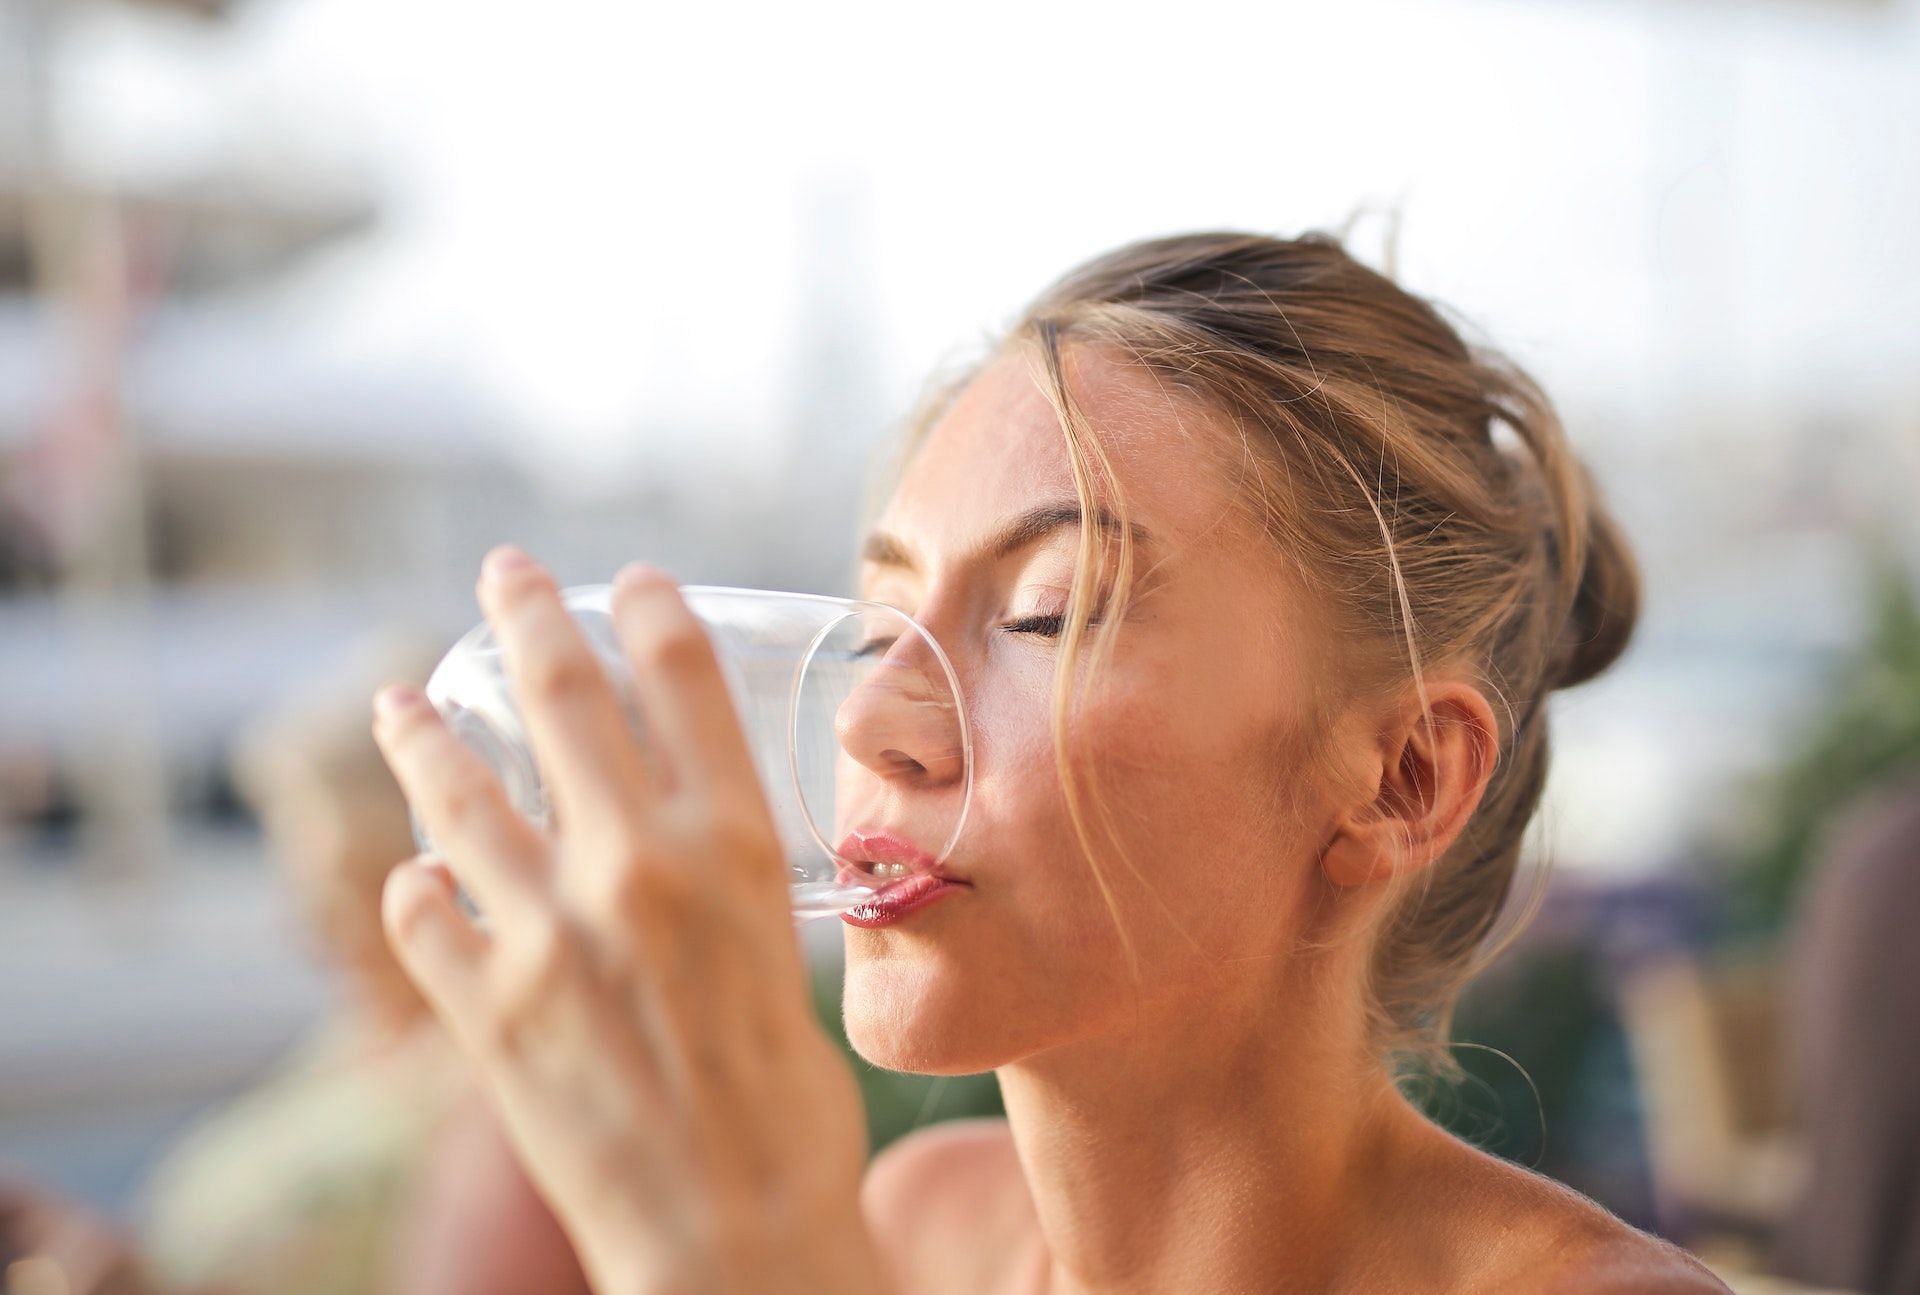 You must drink at least 8 oz. glasses of water every day. (Photo via Pexels/Adrienn)